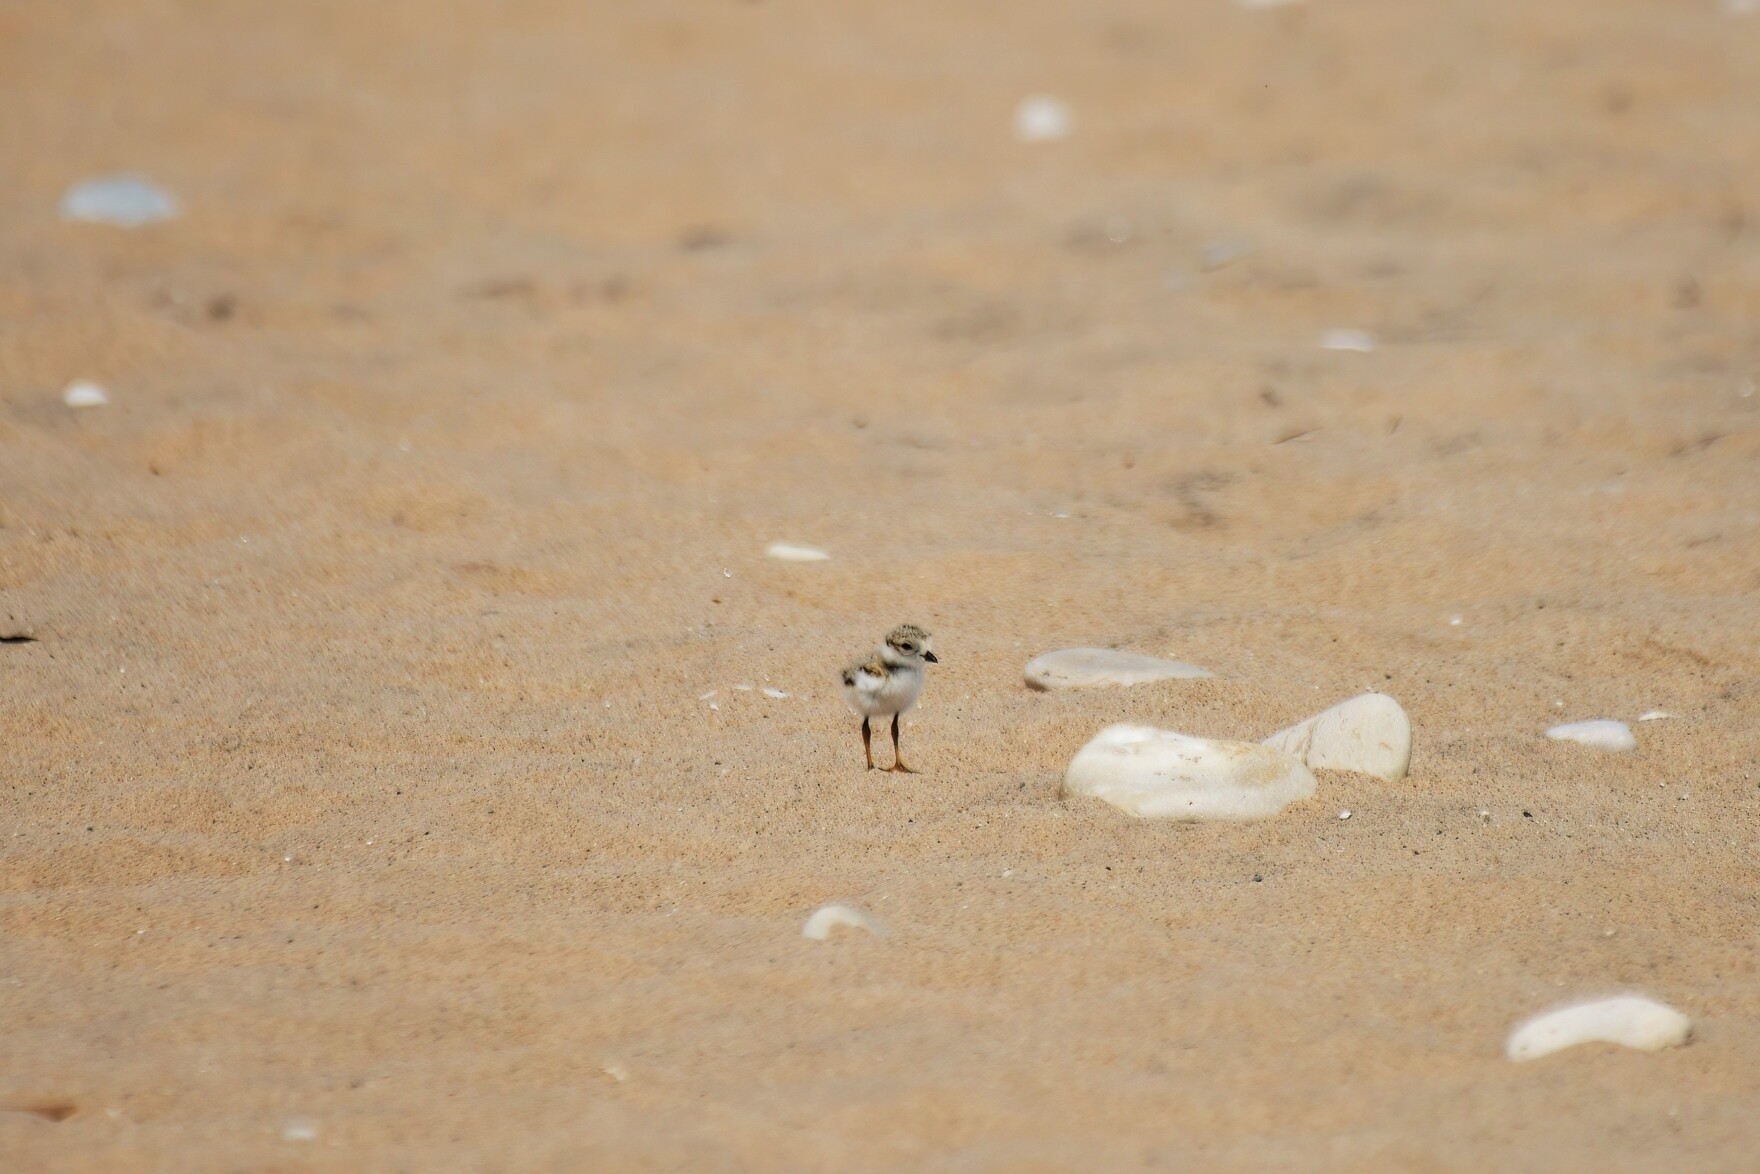 a small plover stands on the sand. the framing makes it look miniscule in comparison to its surroundings